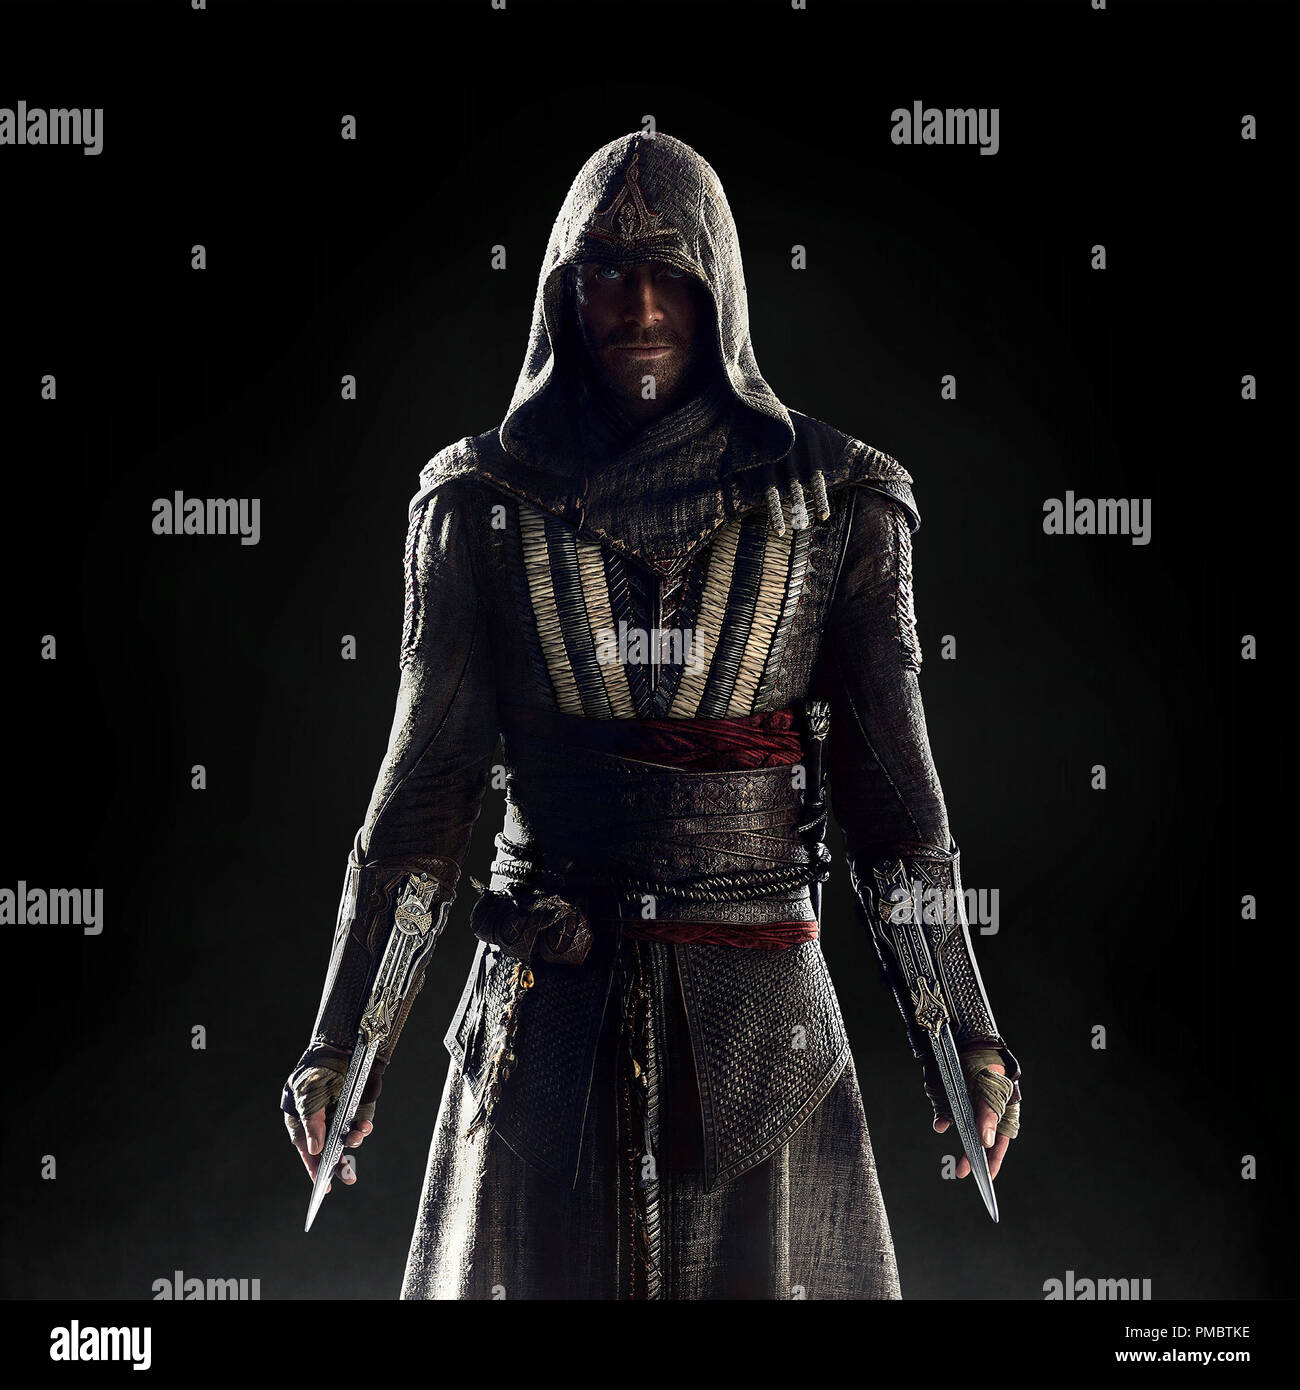 Through a revolutionary technology that unlocks his genetic memories, Callum Lynch (Michael Fassbender) experiences the adventures of his ancestor, Aguilar, in 15th Century Spain.  Callum discovers he is descended from a mysterious secret society, the Assassins, and amasses incredible knowledge and skills to take on the oppressive and powerful Templar organization in the present day. 'Assassin's Creed' (2016) Twentieth Century Fox Stock Photo